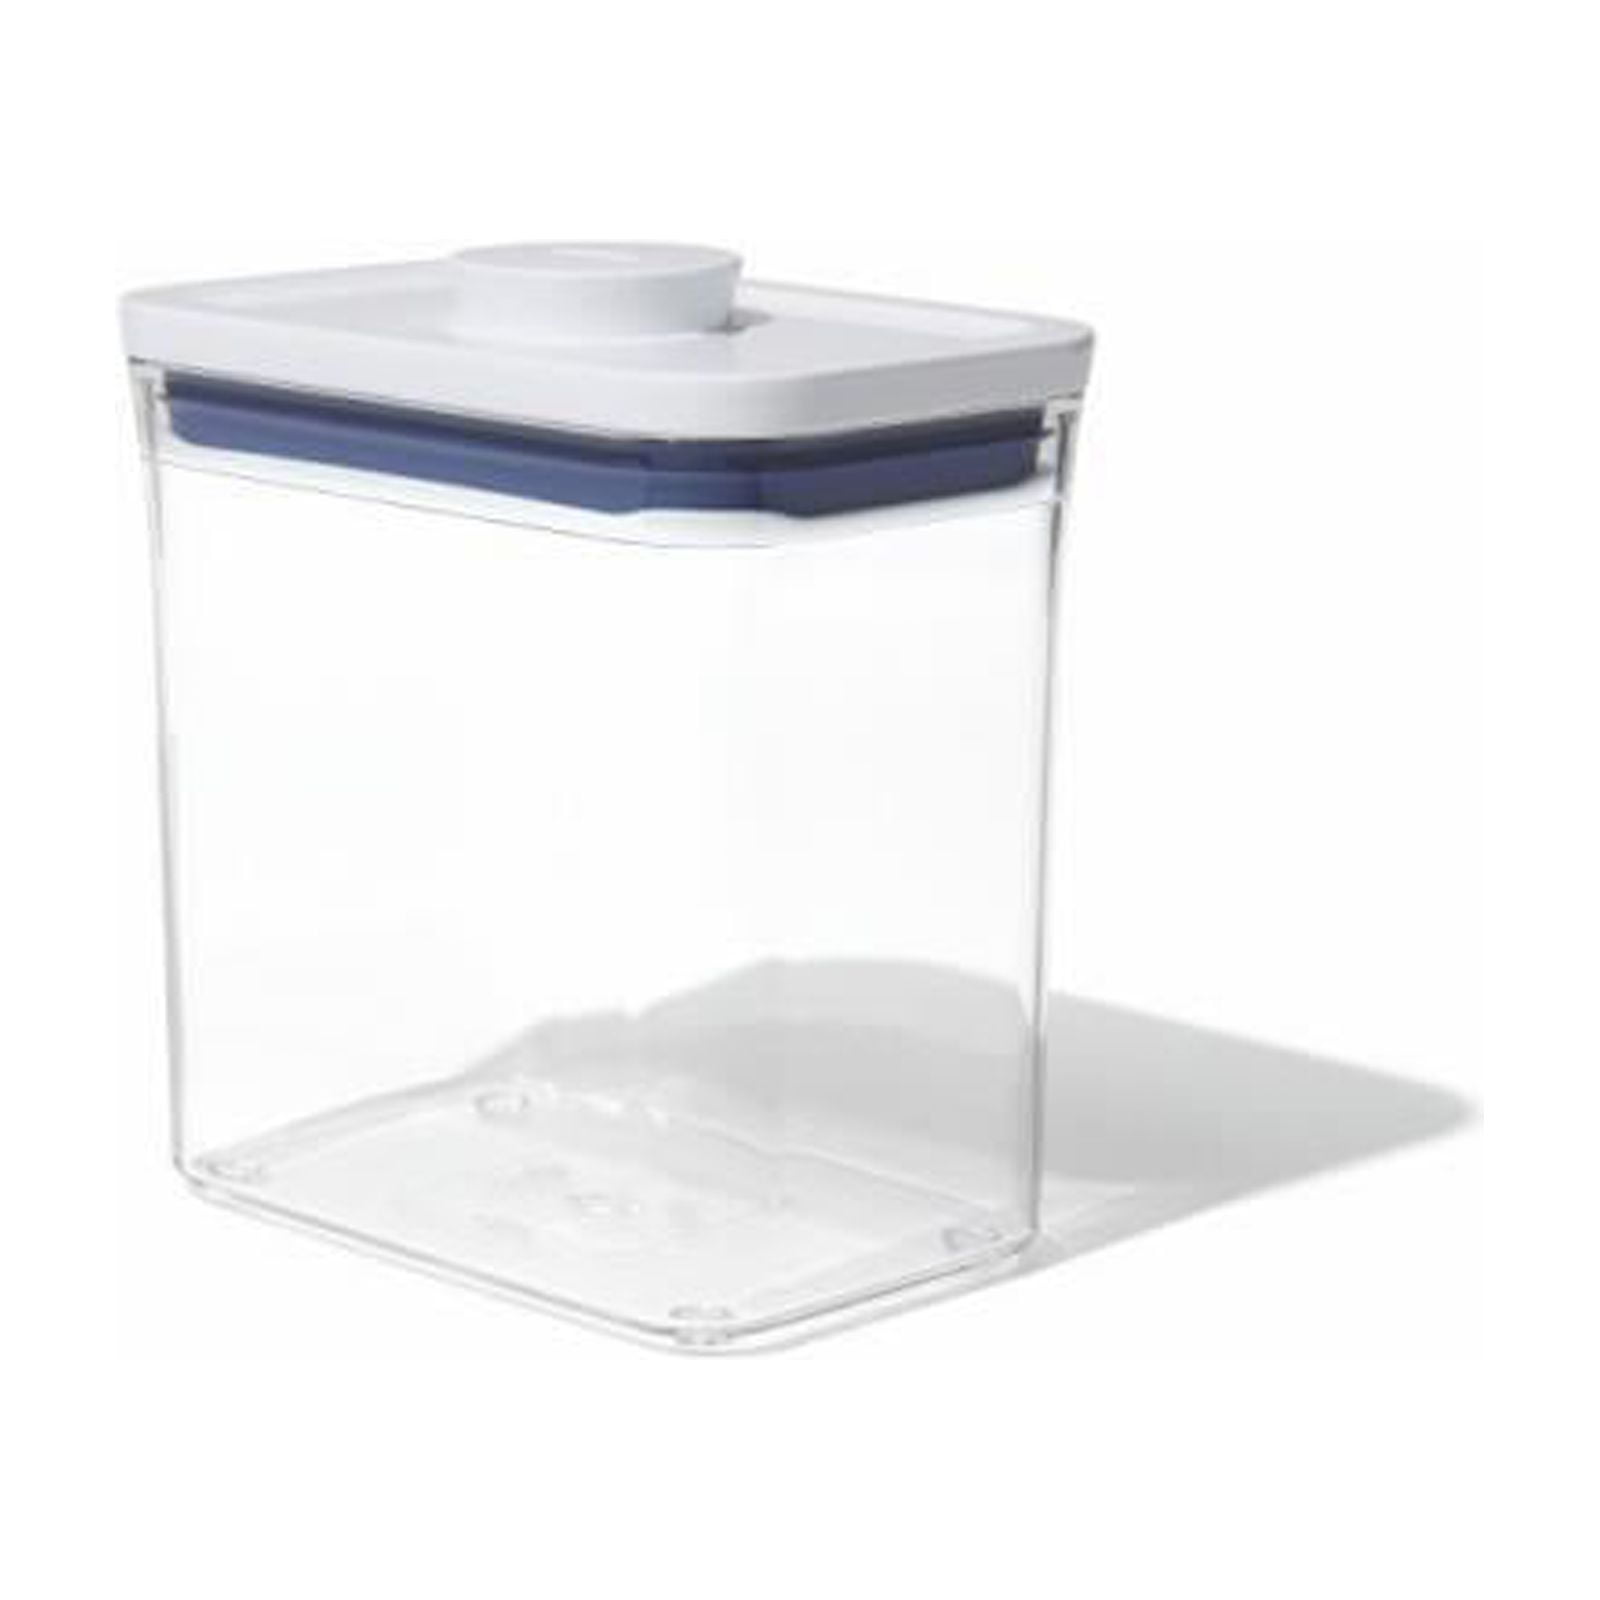 OXO Good Grips Qt. Container Size - Walmart.com